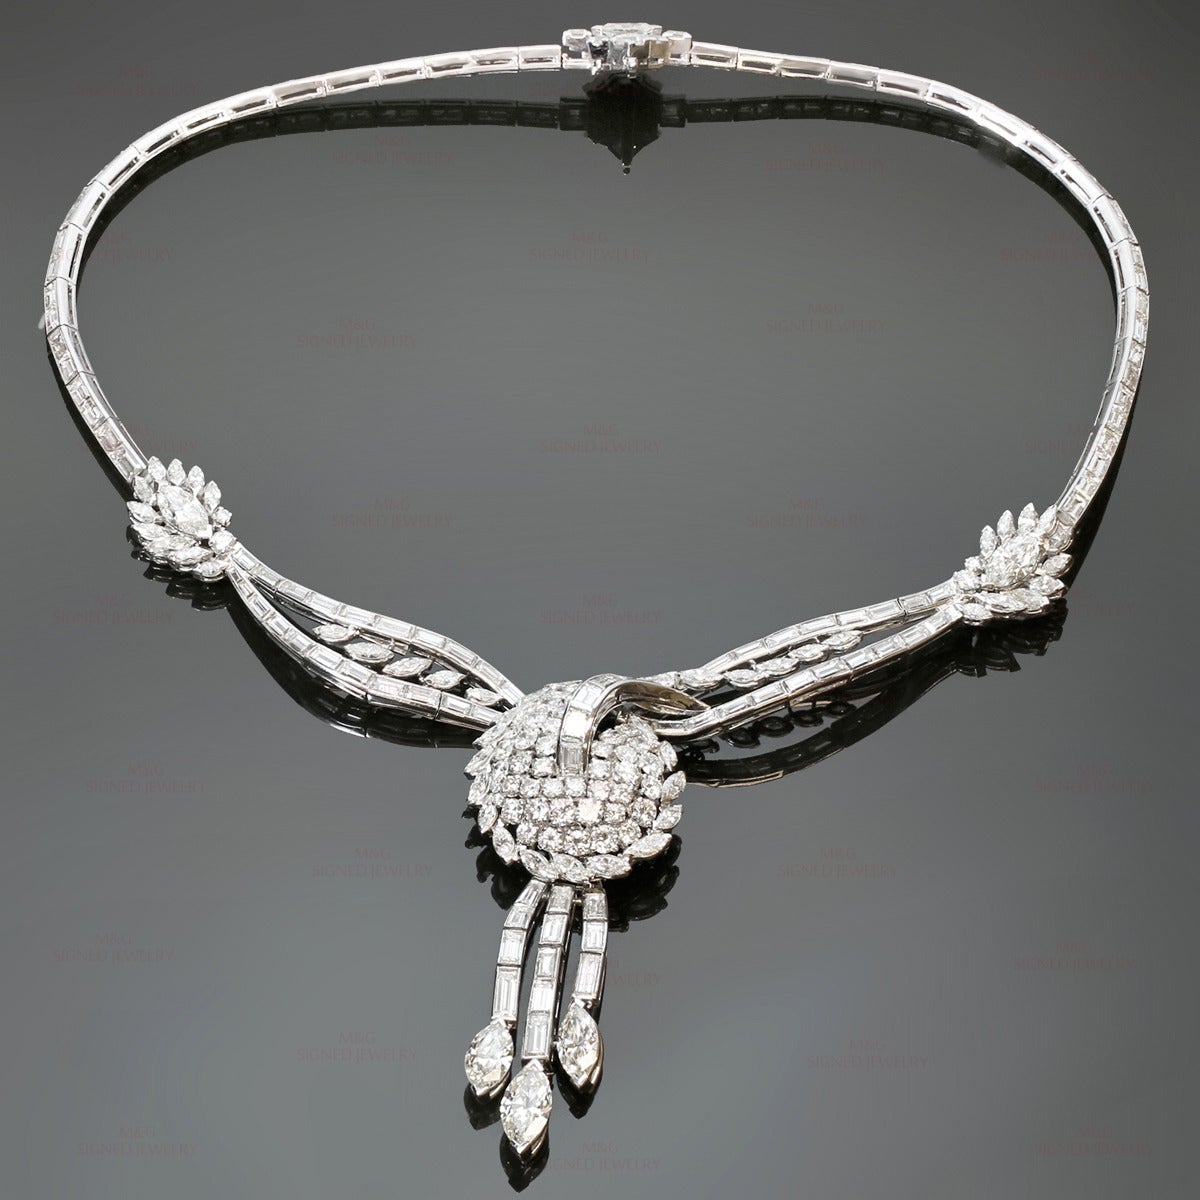 This gorgeous vintage evening necklace features a classic fringe design with a detachable pendant. Beautifully crafted in fine platinum and set with sparkling marquise-cut, square-cut, and baguette-cut diamonds of an estimated 38.75 carats. The